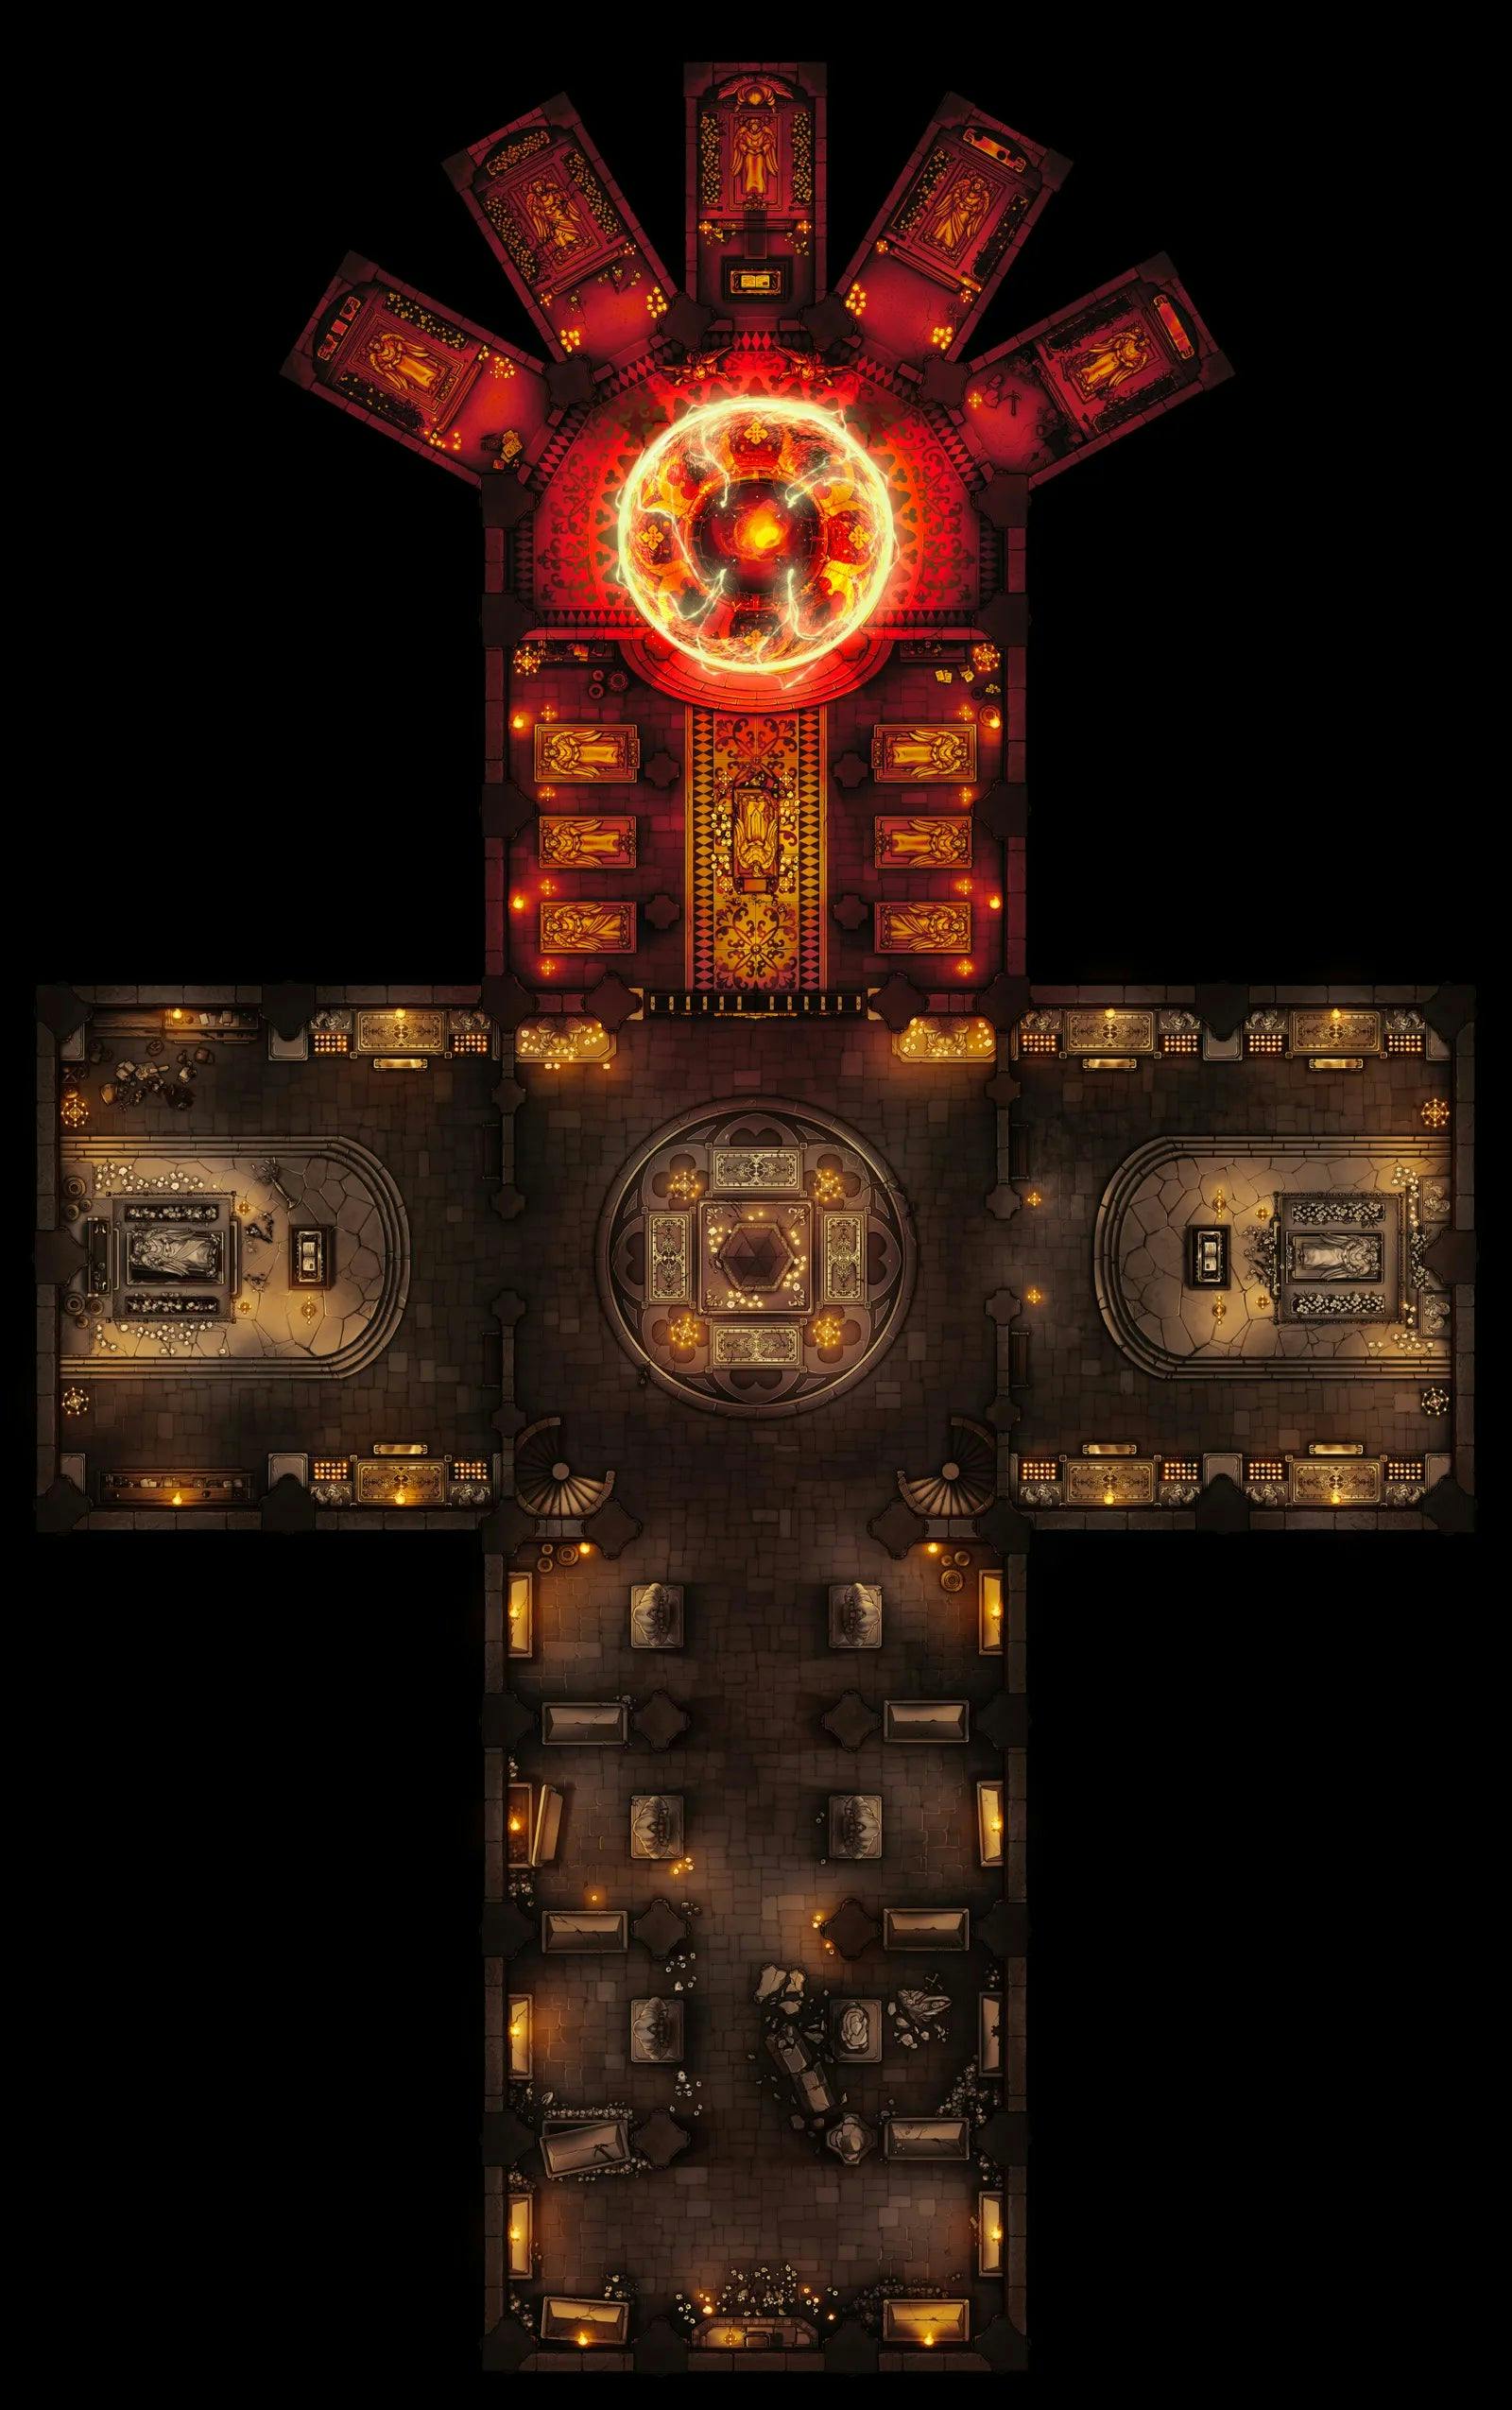 Grand Cathedral Crypt Map - aa668fcd7c0f0fe037c15f8cec91738a